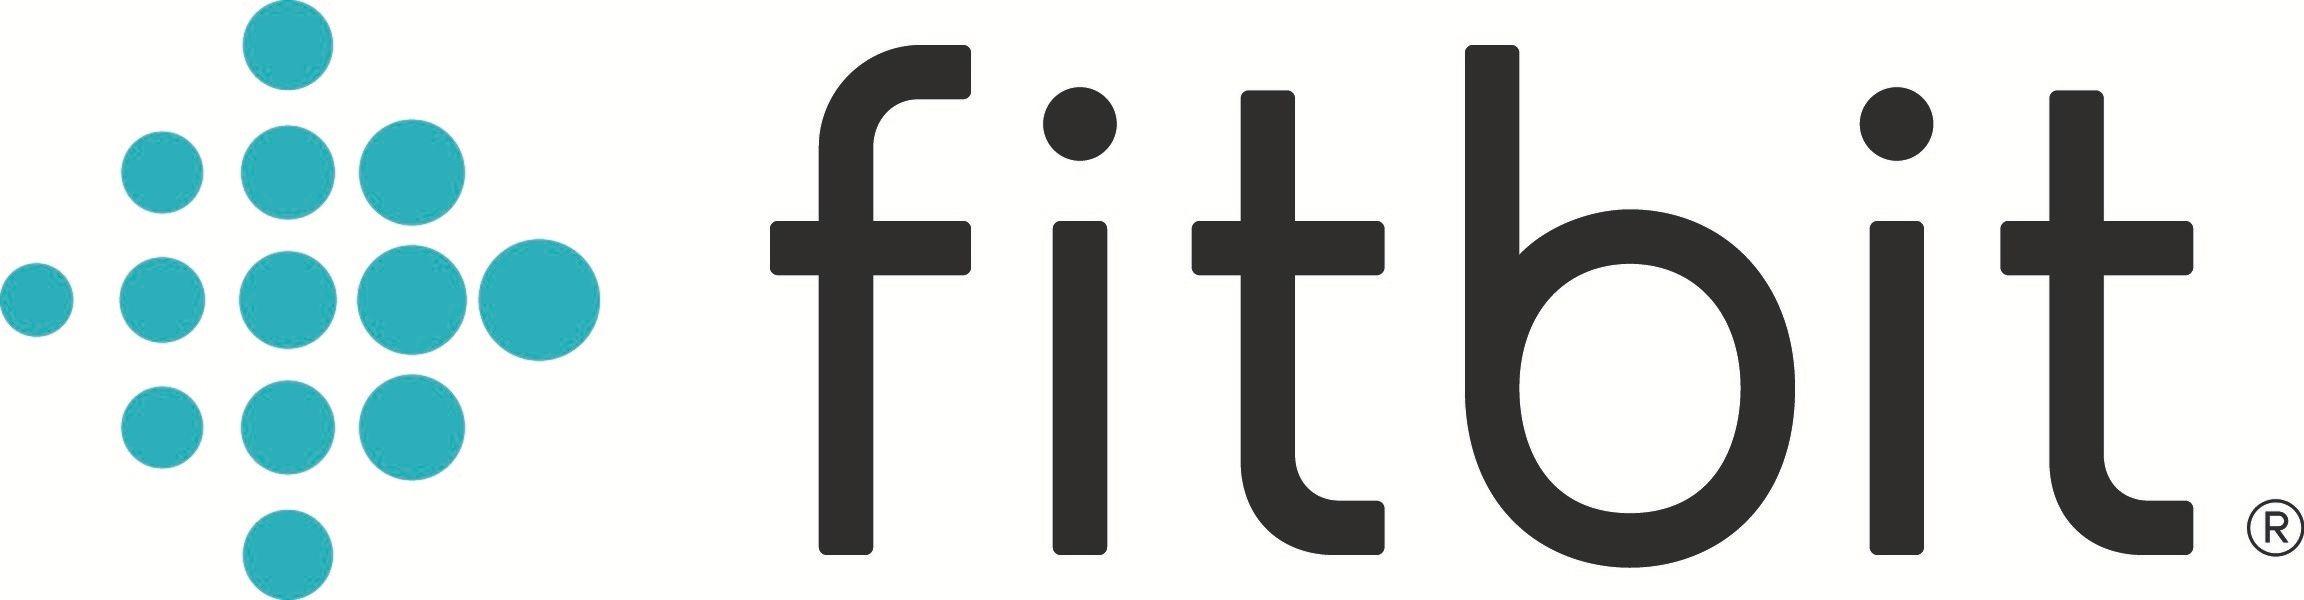 Fitbit Versa Logo - Fitbit Introduces Fitbit Versa, the Smartwatch for All